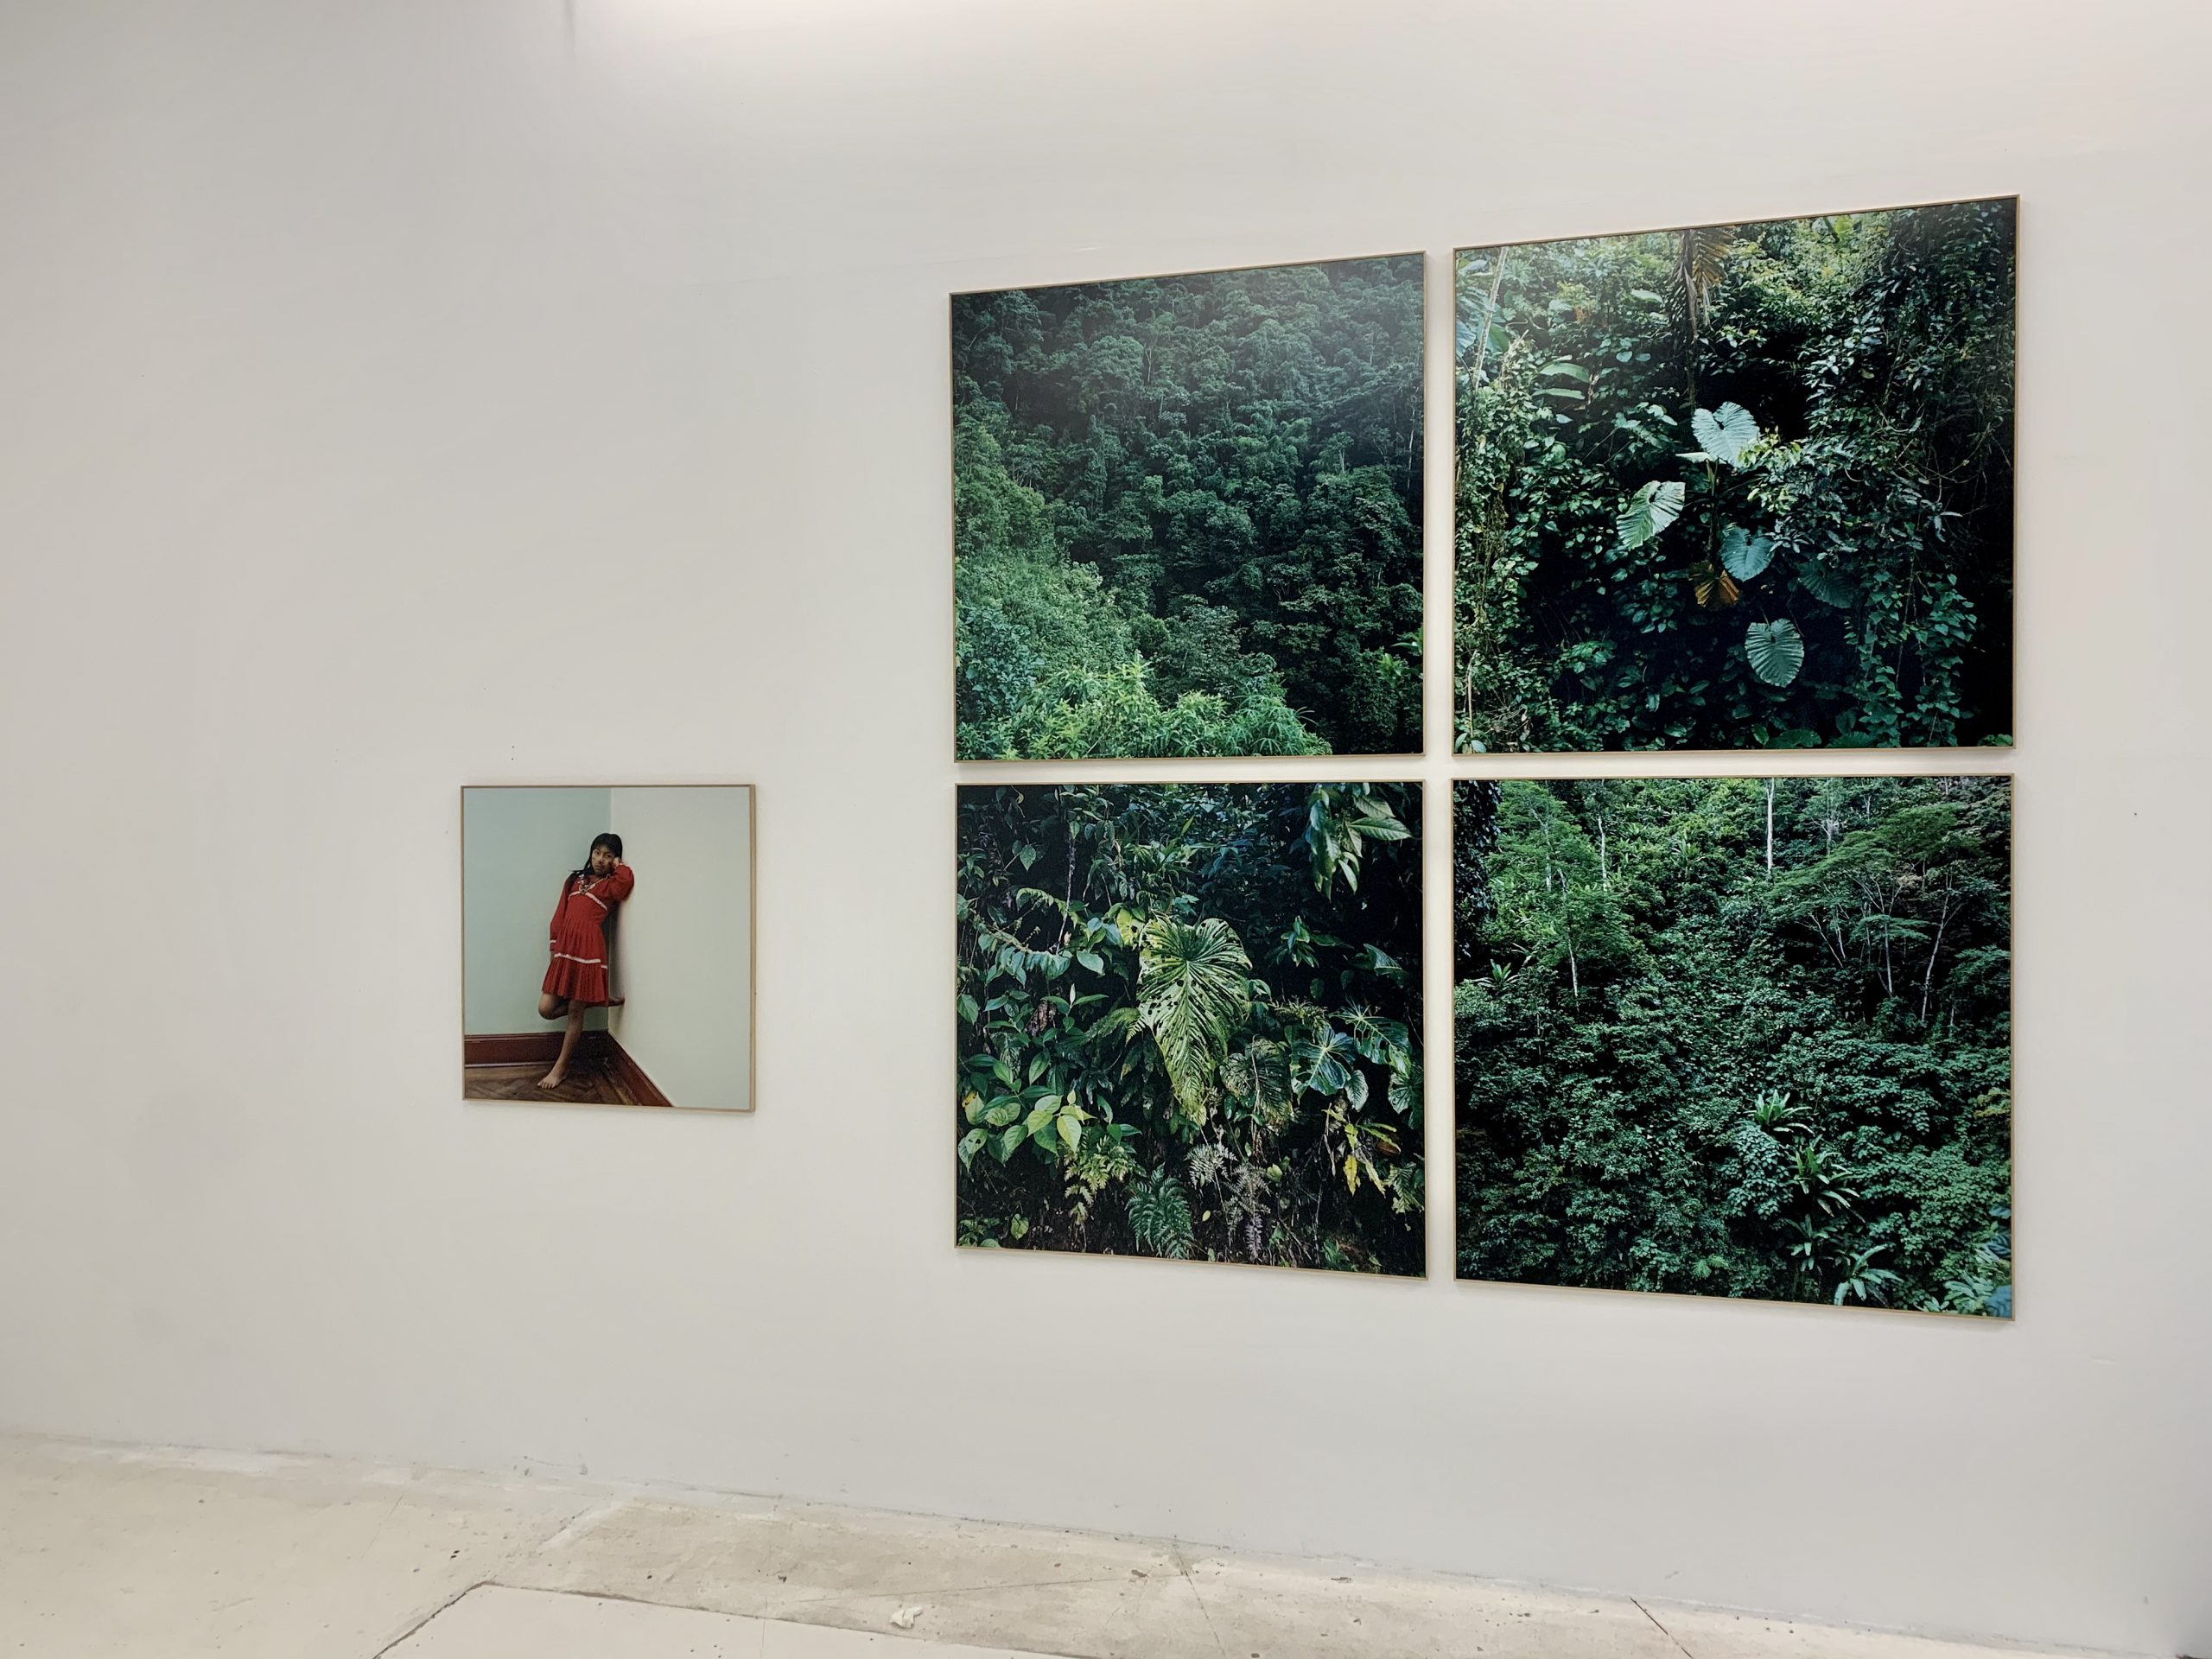 Te de Bogota, curated show by Jorge Sanguino with photographs by Karen Paulina Biswell